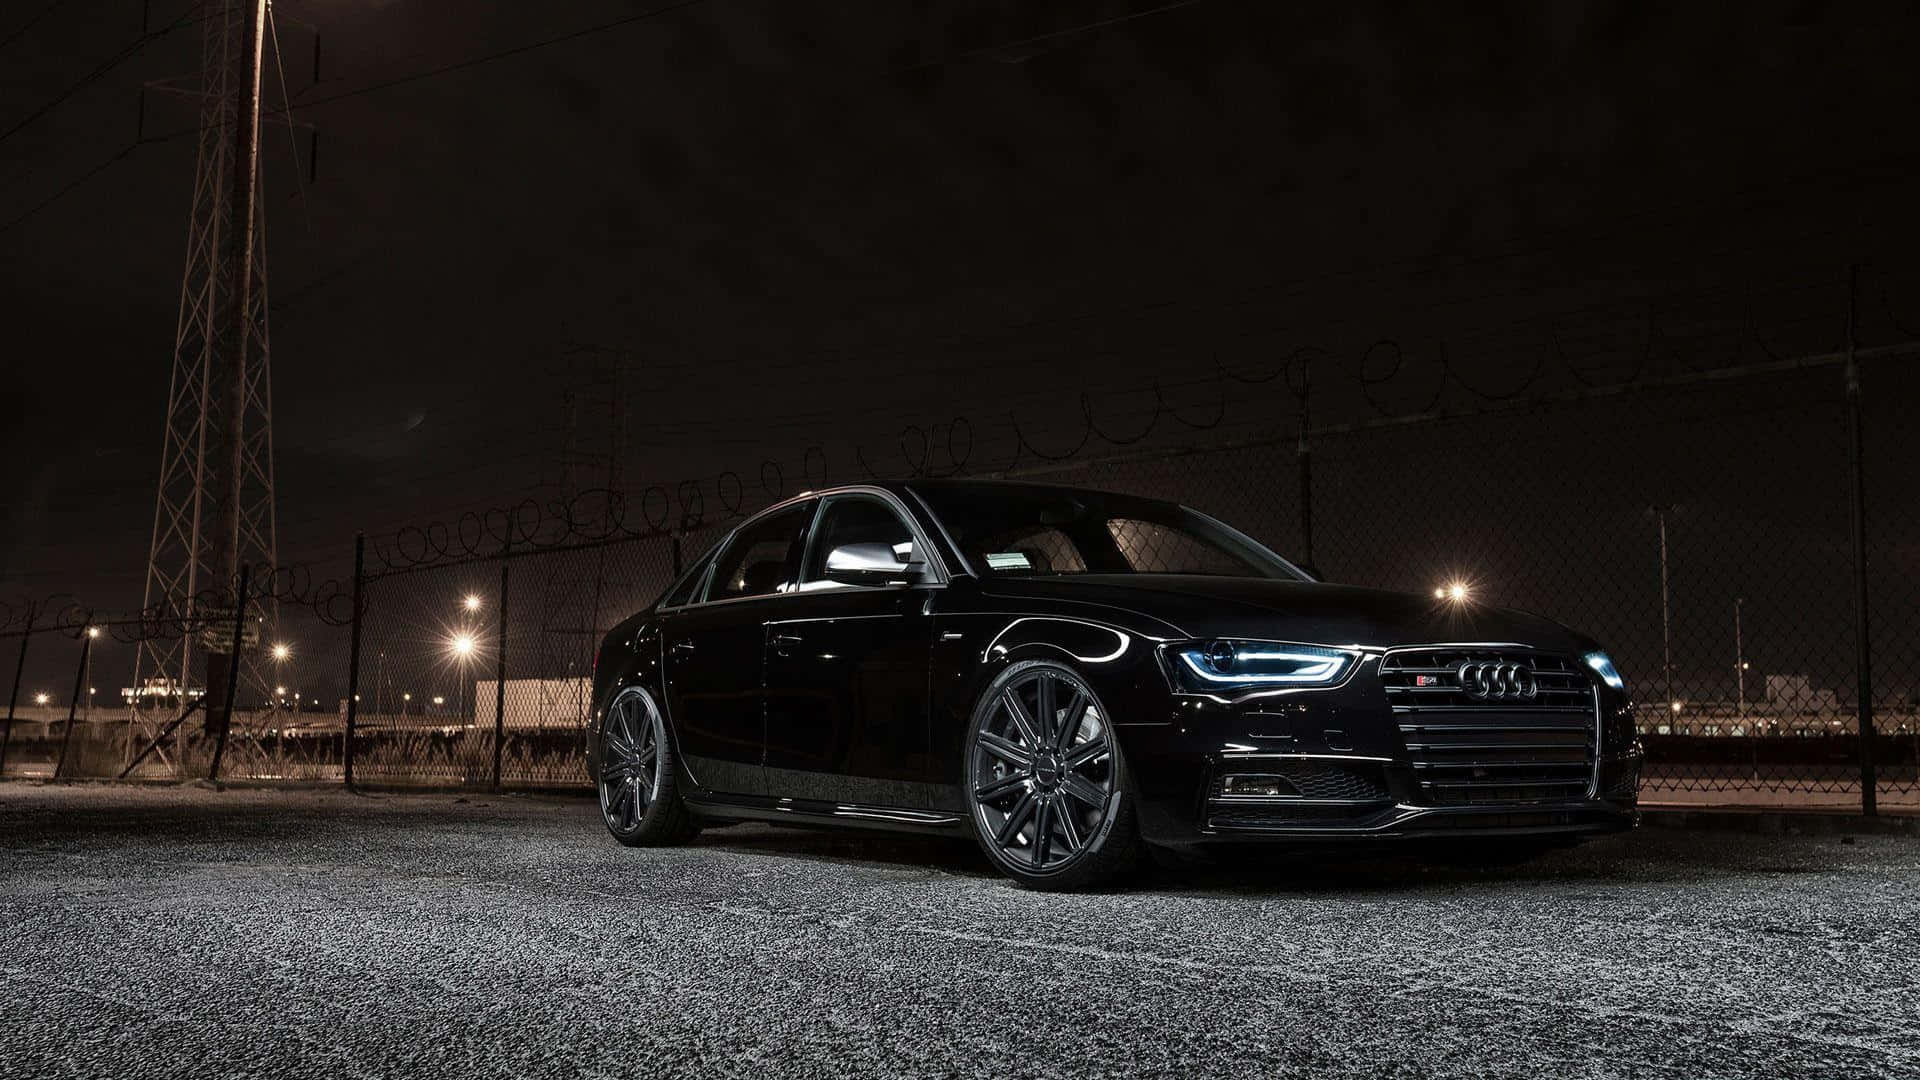 Sleek and Powerful Audi S4 in Action Wallpaper